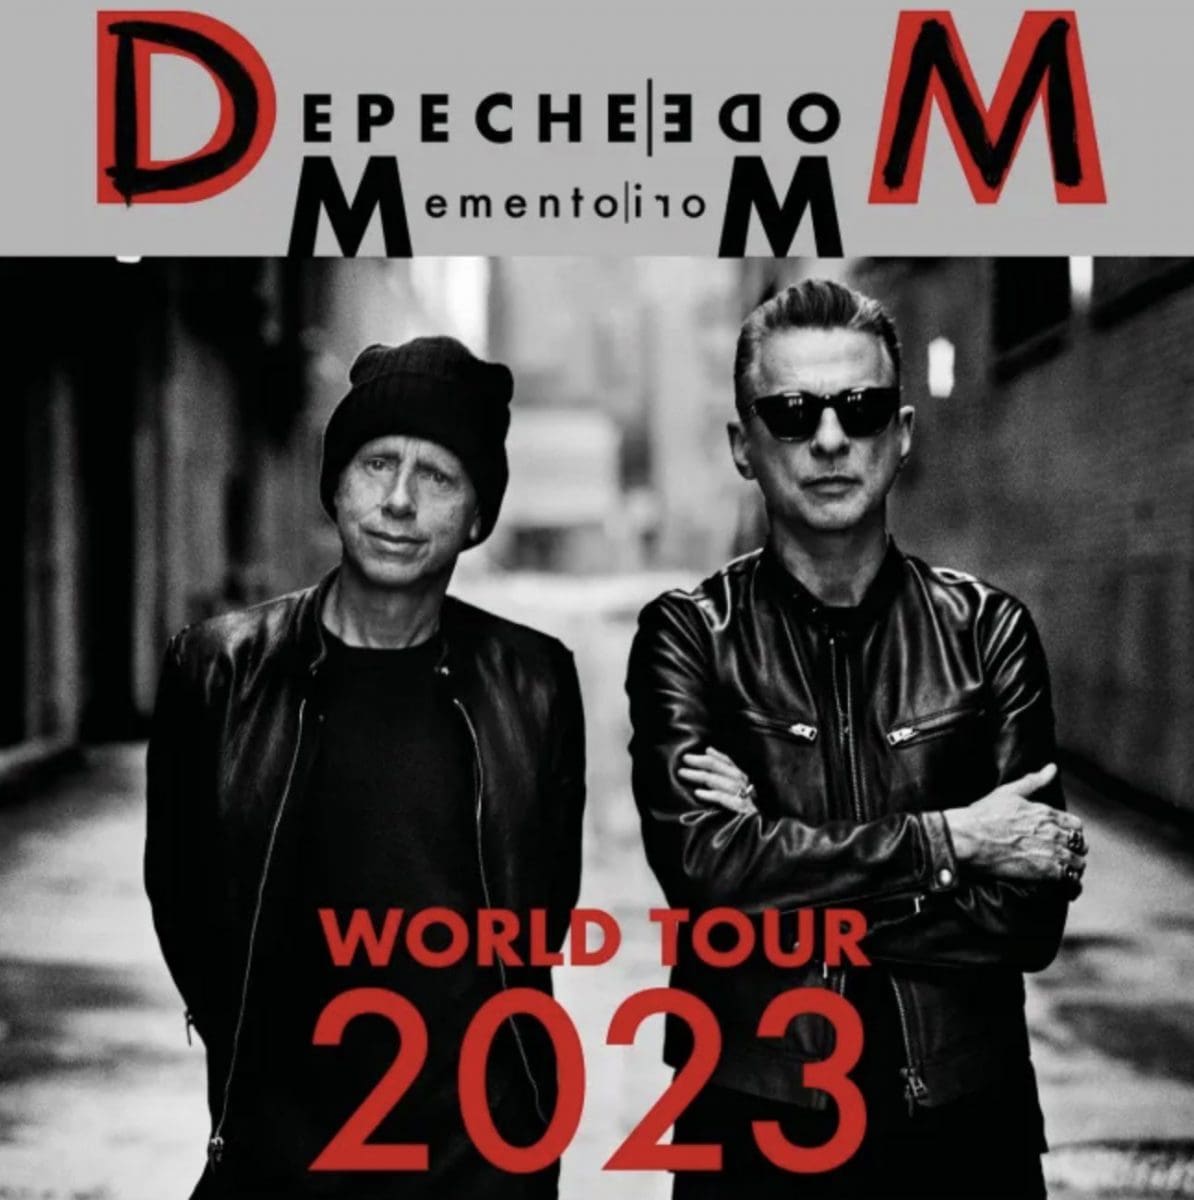 Depeche Mode announce new album and world tour for 2023 - We Rave You